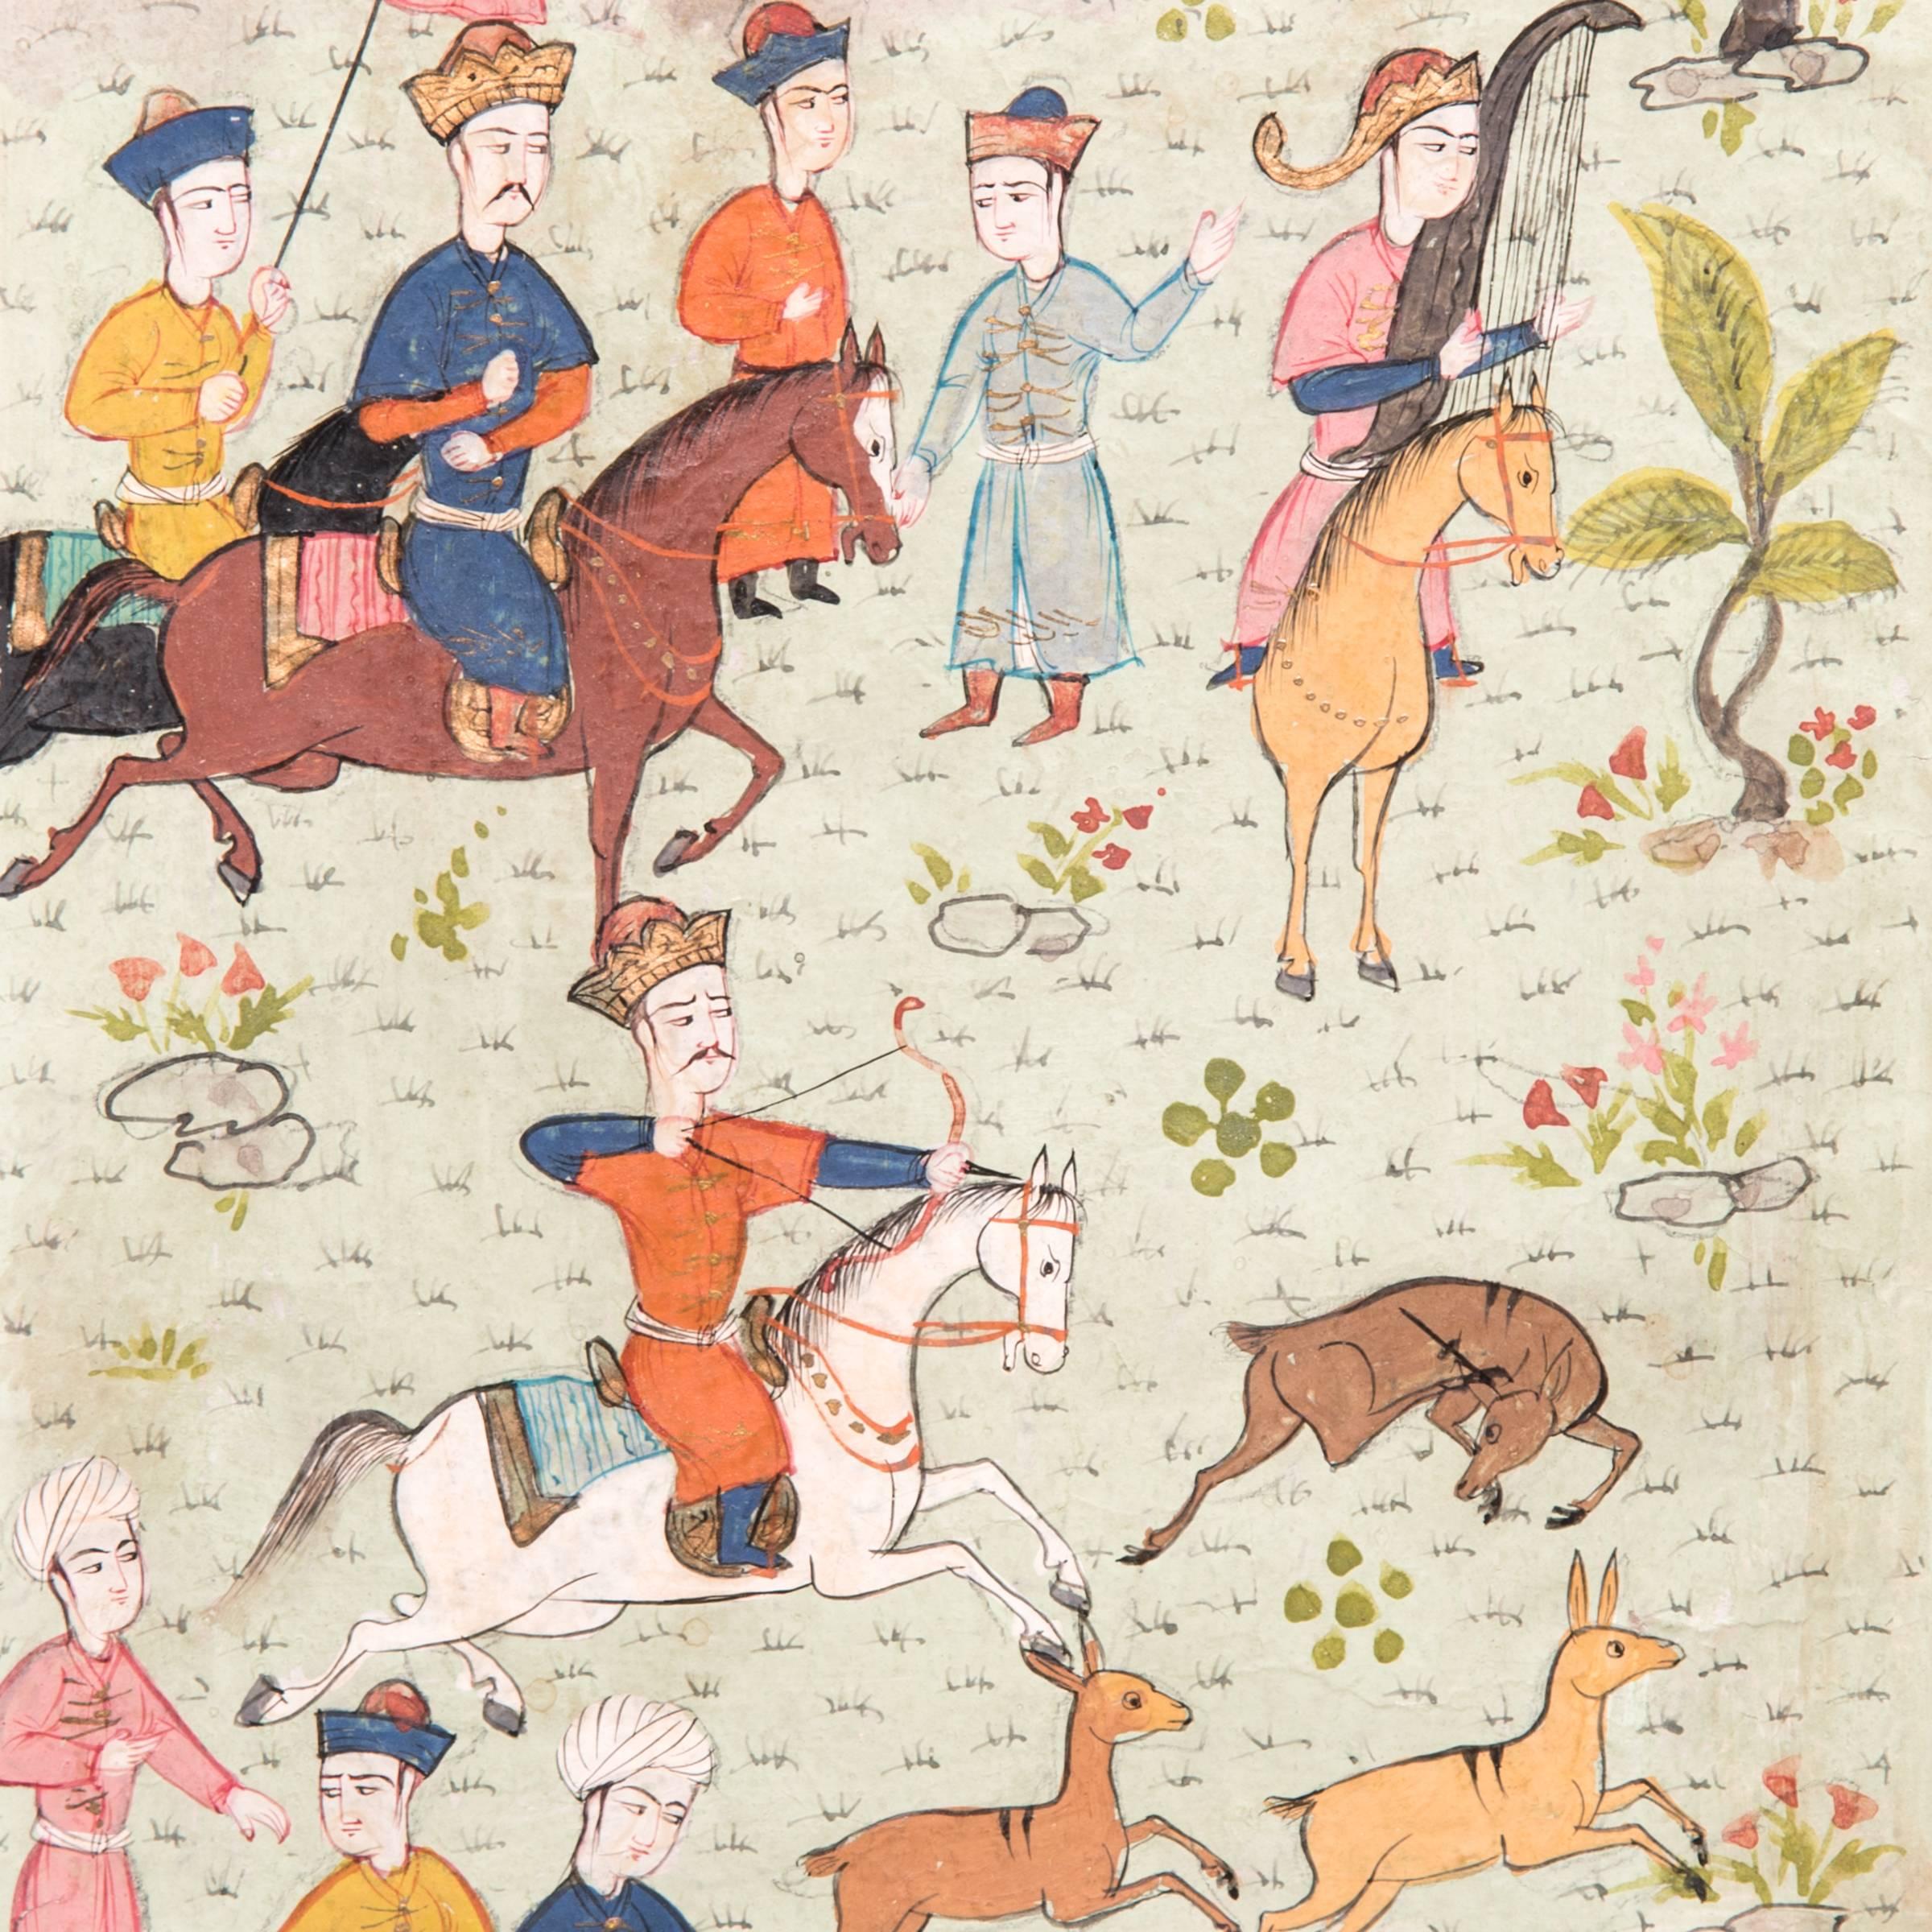 A private form of painting that emerged in Persia during the 13th century after the Mongol conquests, Persian miniatures were often kept in books or albums and served to illustrate the accompanying texts beautifully scripted in calligraphy. This